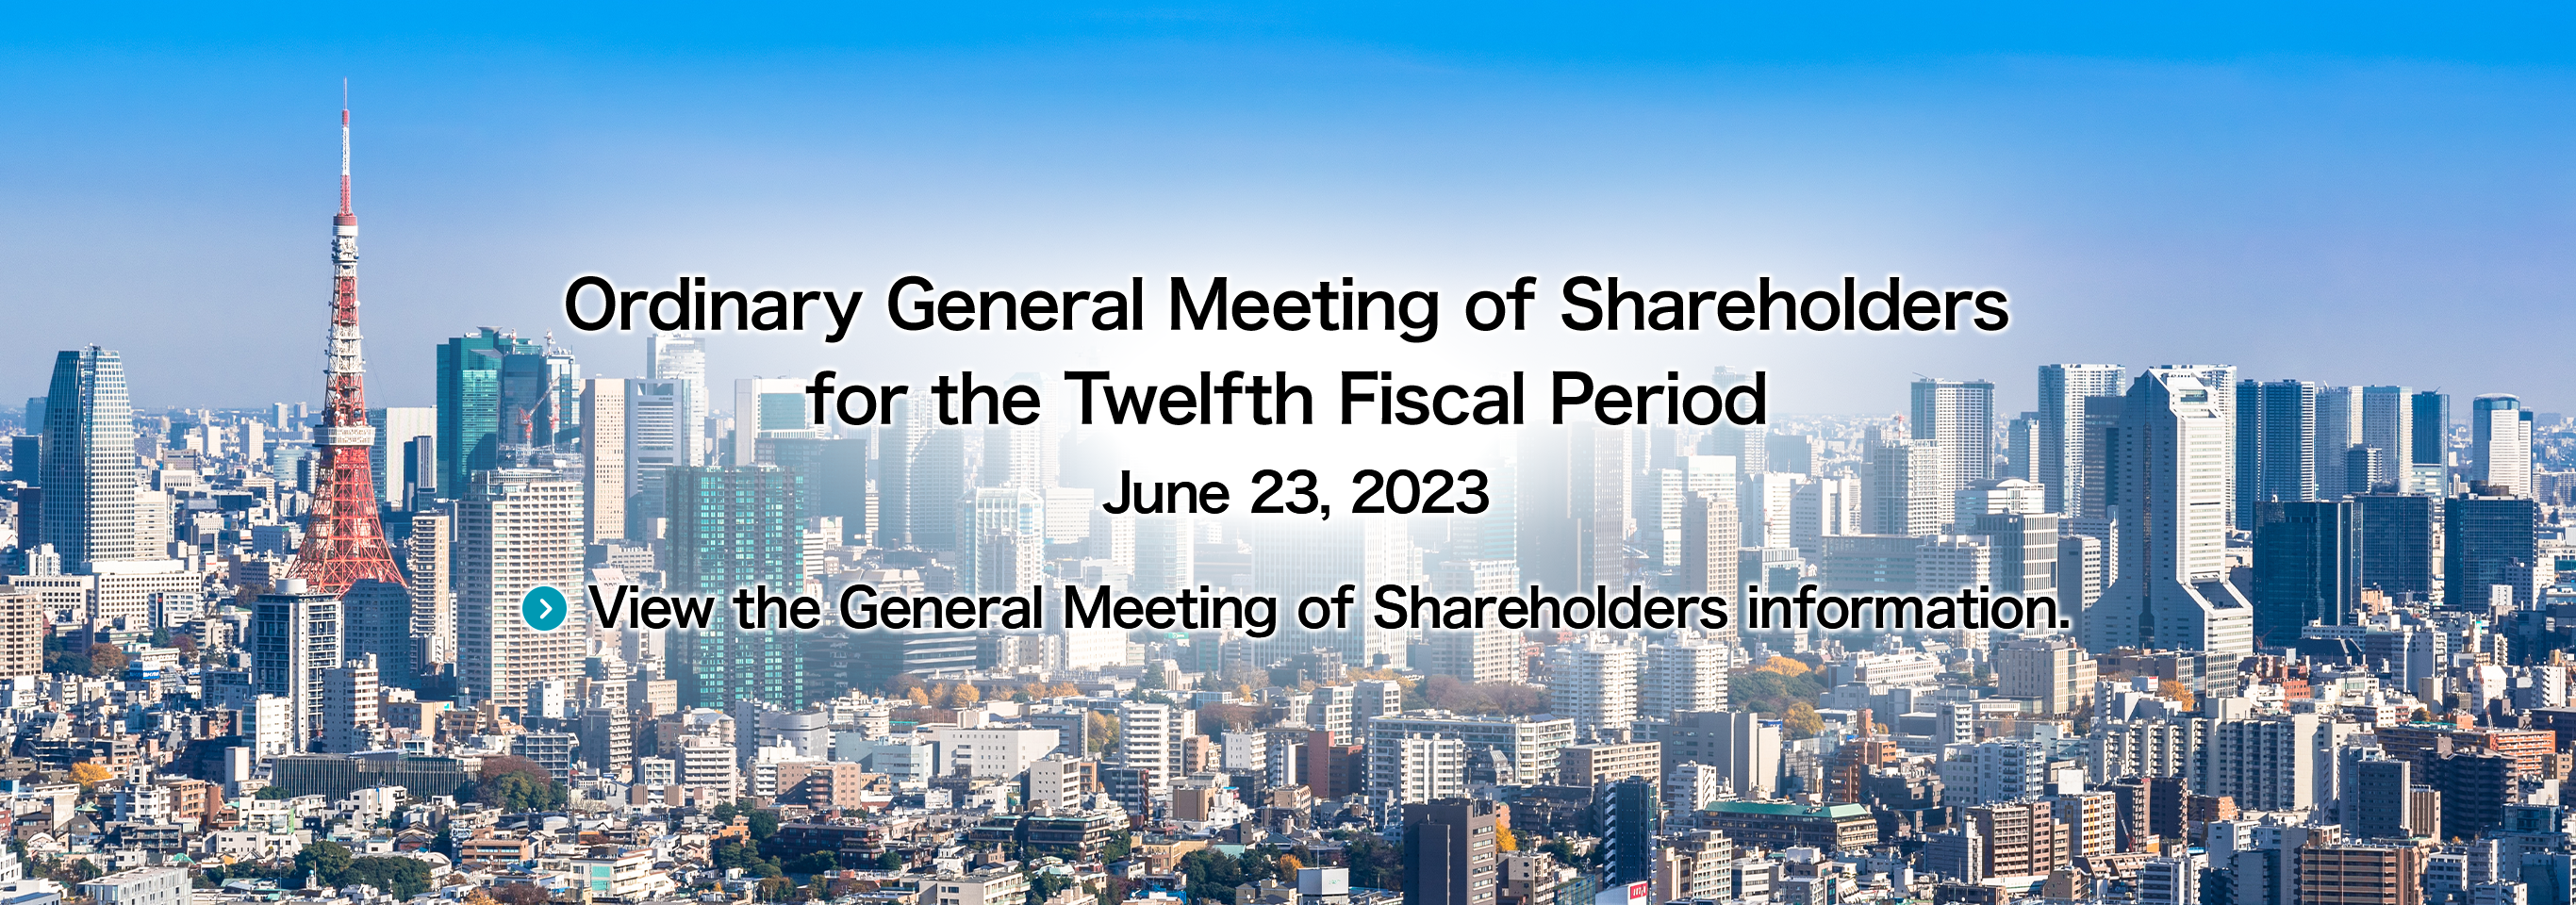 Ordinary General Meeting of Shareholders for the Eleventh Fiscal Period June 23, 2022 View the General Meeting of Shareholders information.